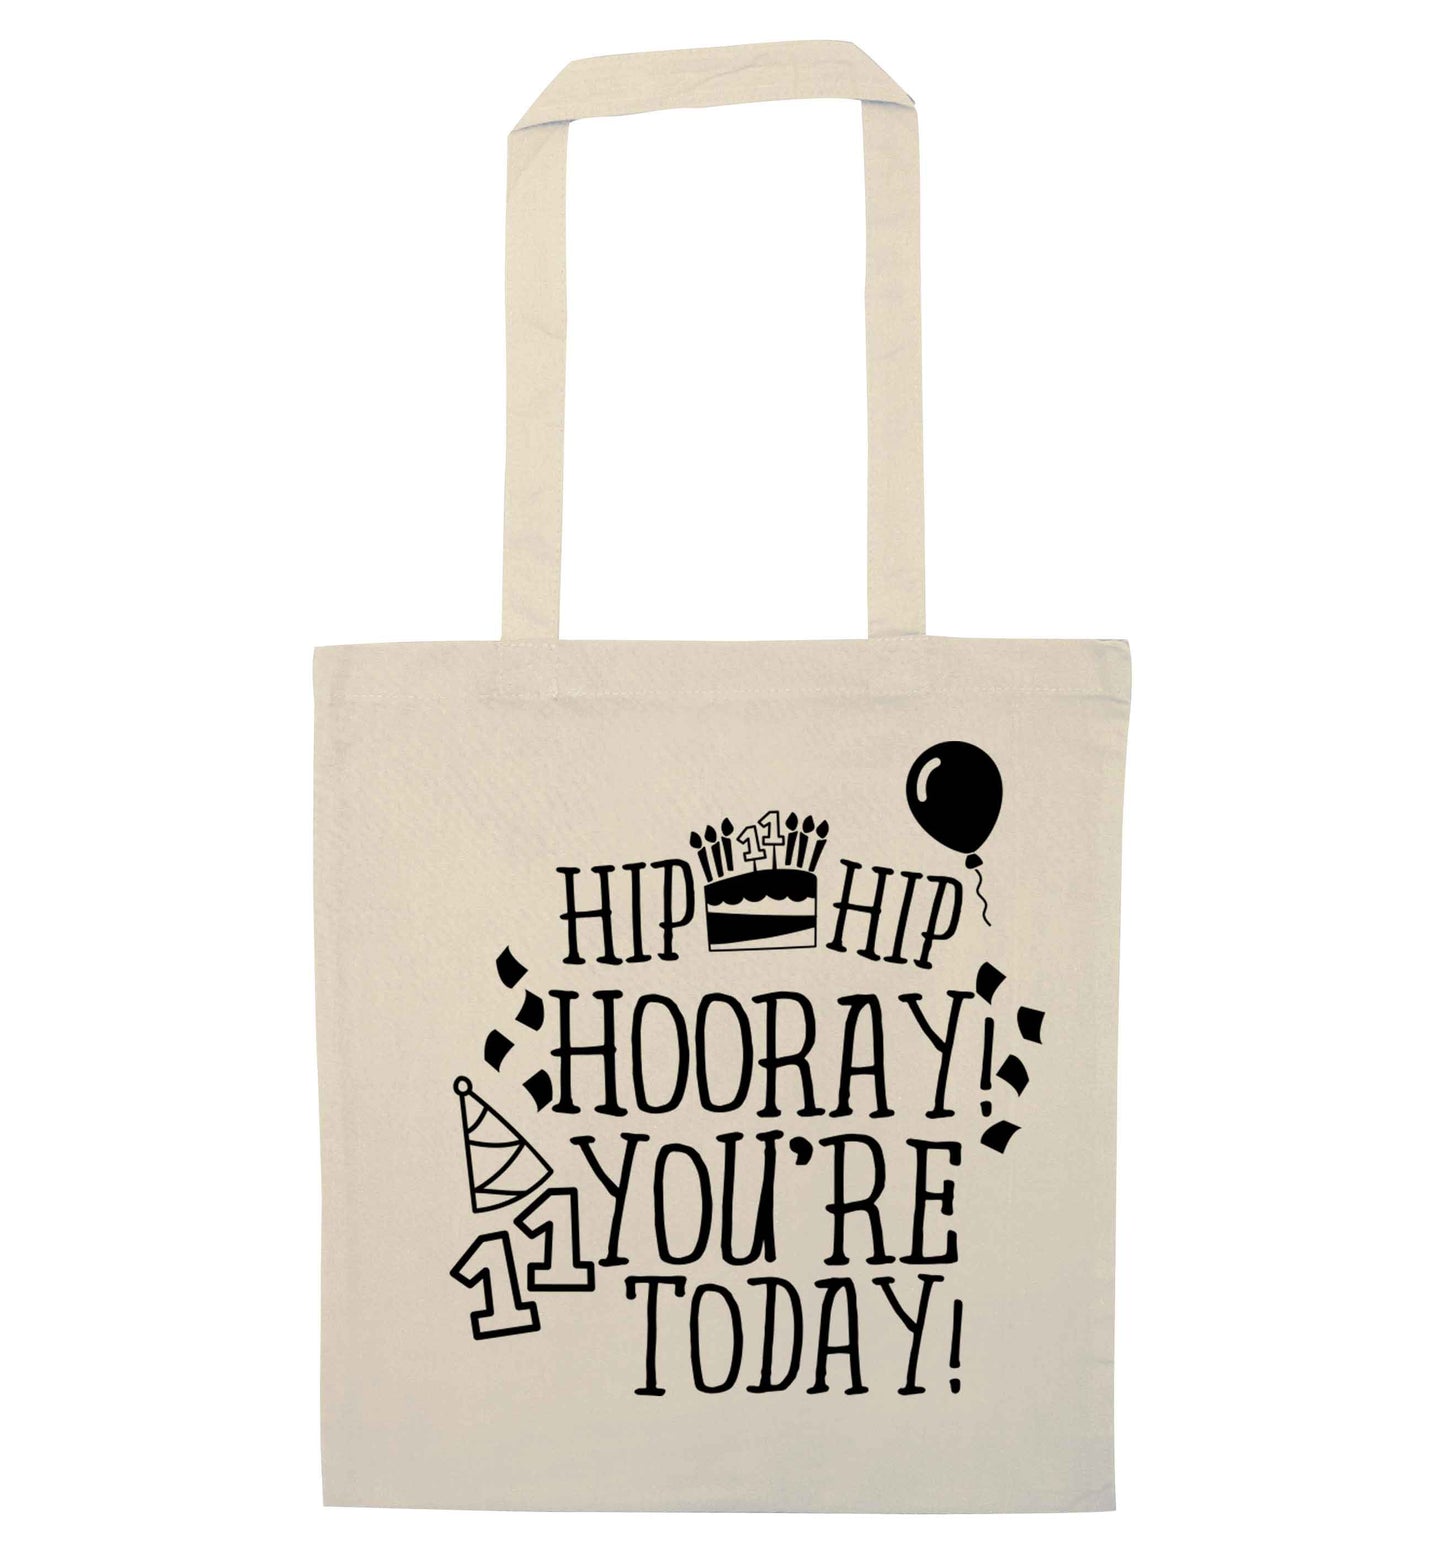 Hip hip hooray I you're eleven today! natural tote bag